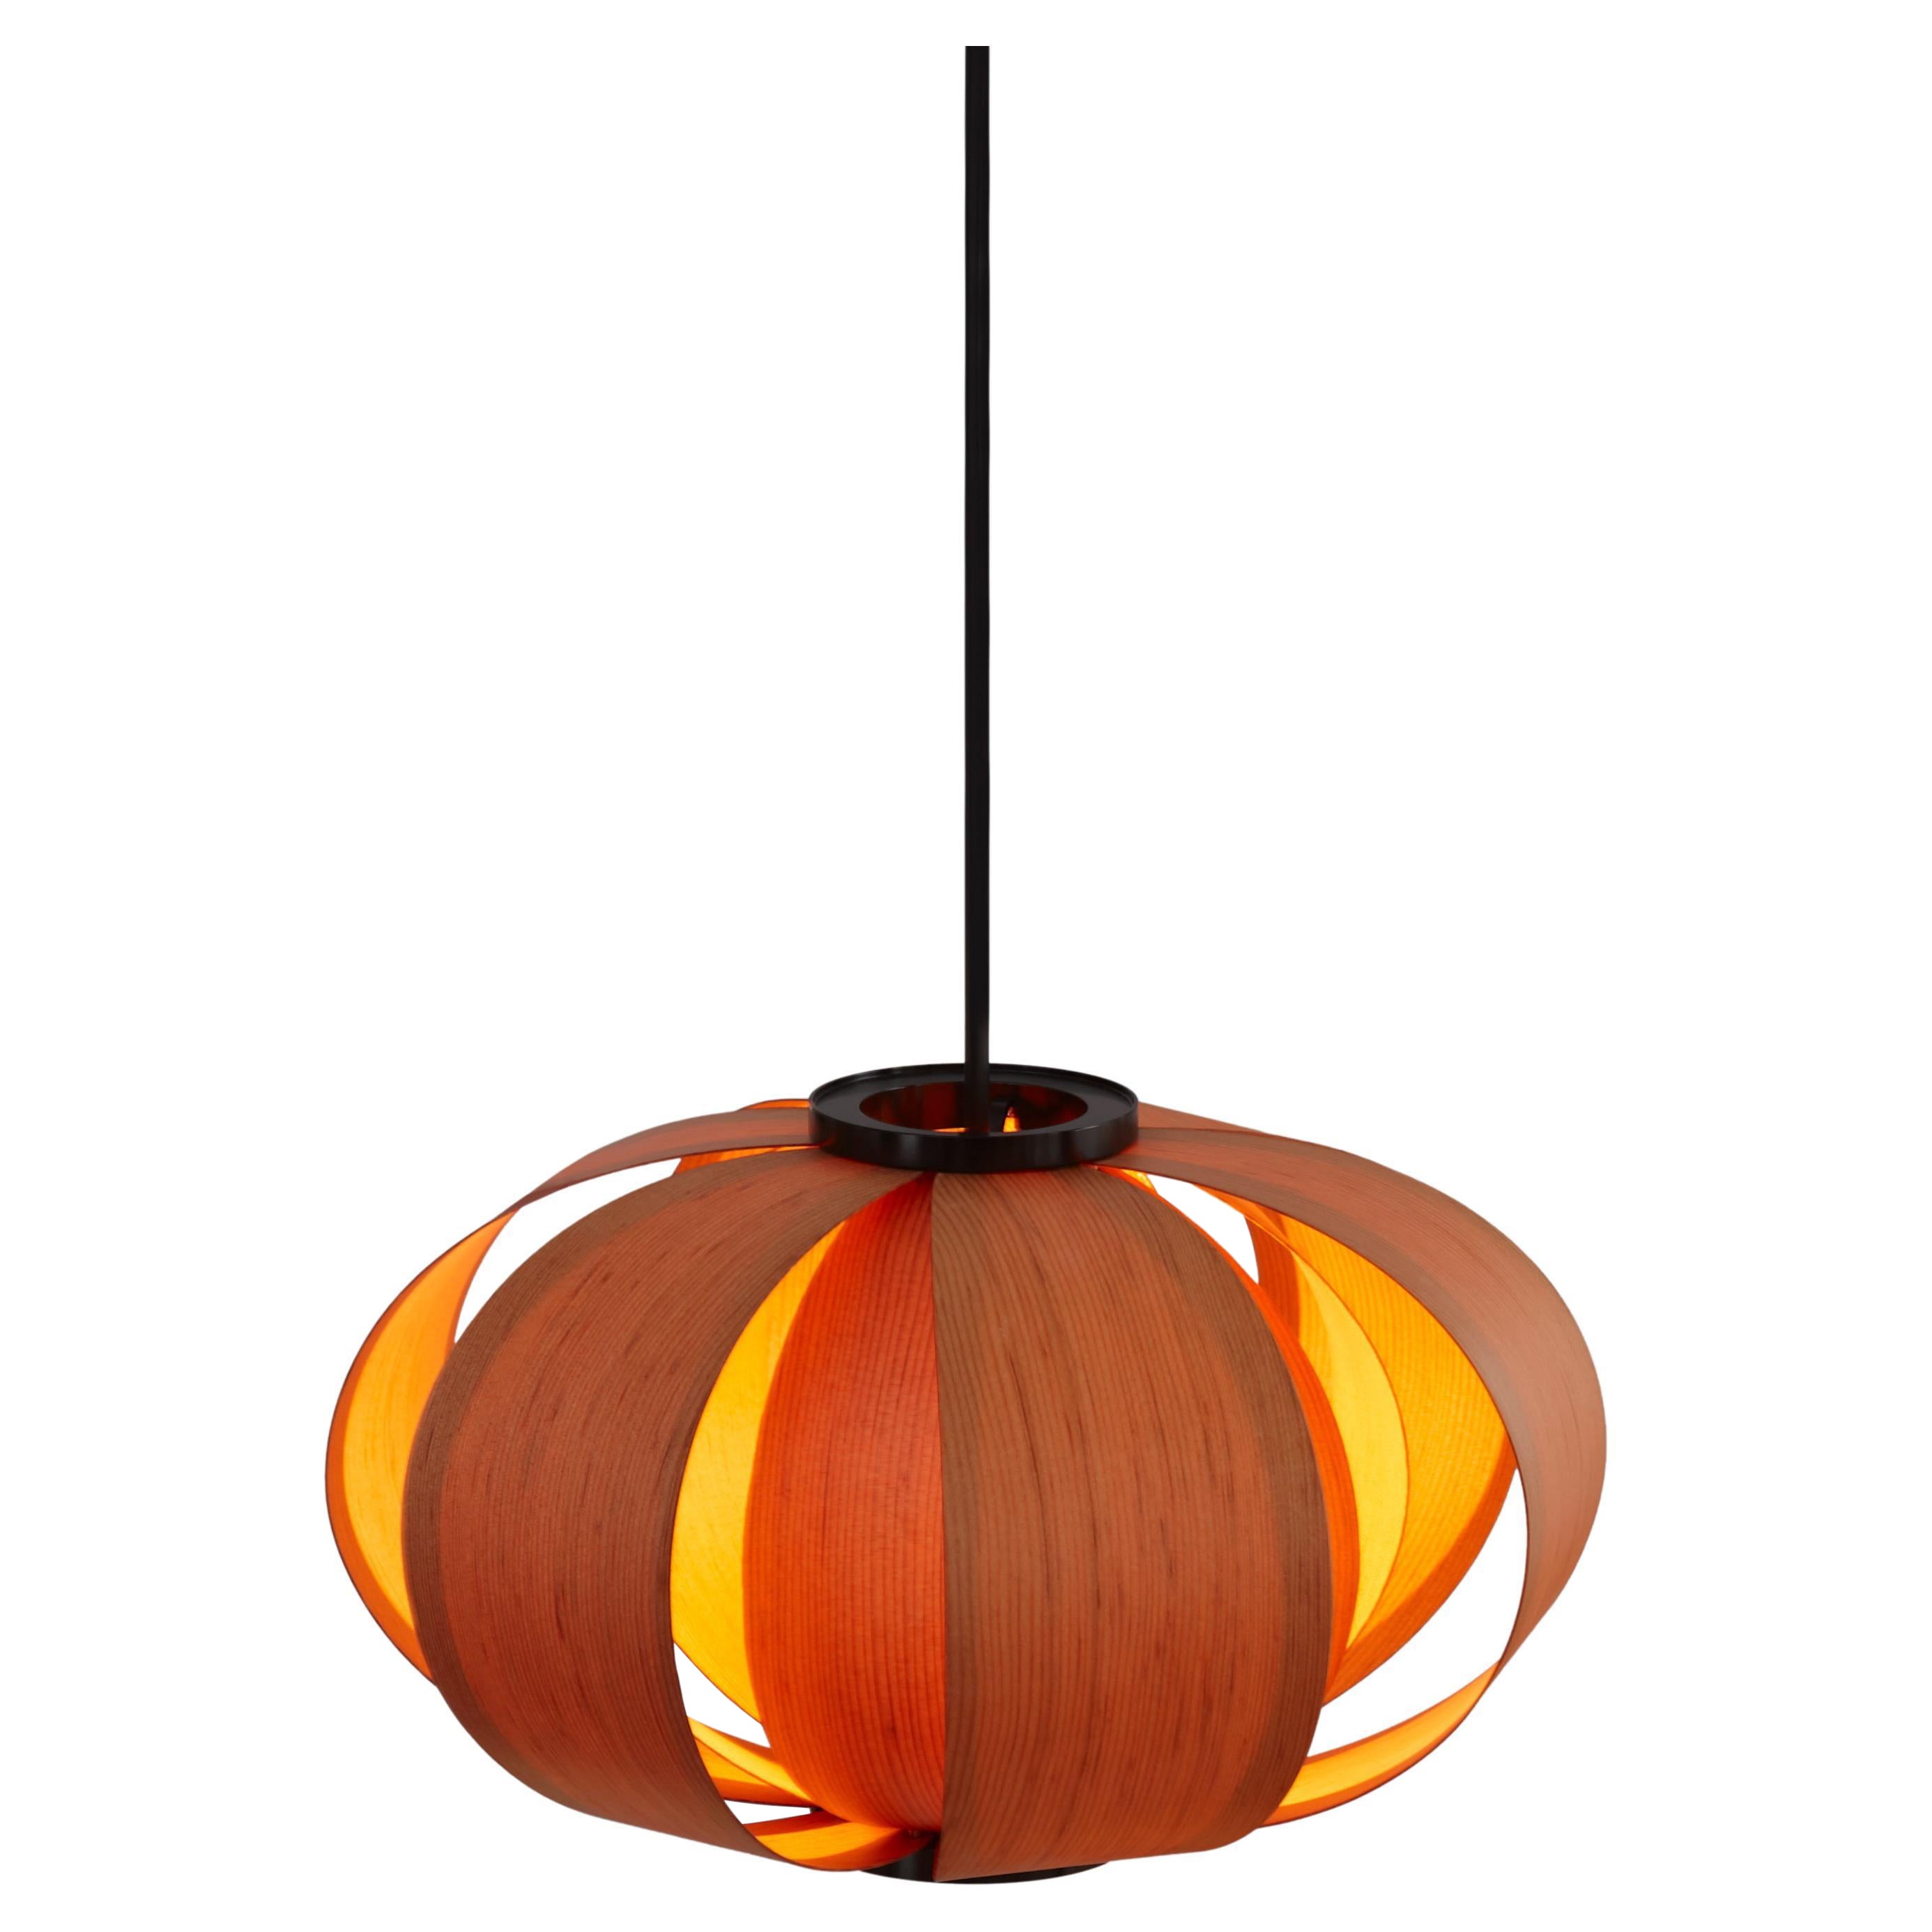 J. A. Coderch 'Disa Mini' Wood Suspension Lamp for Tunds